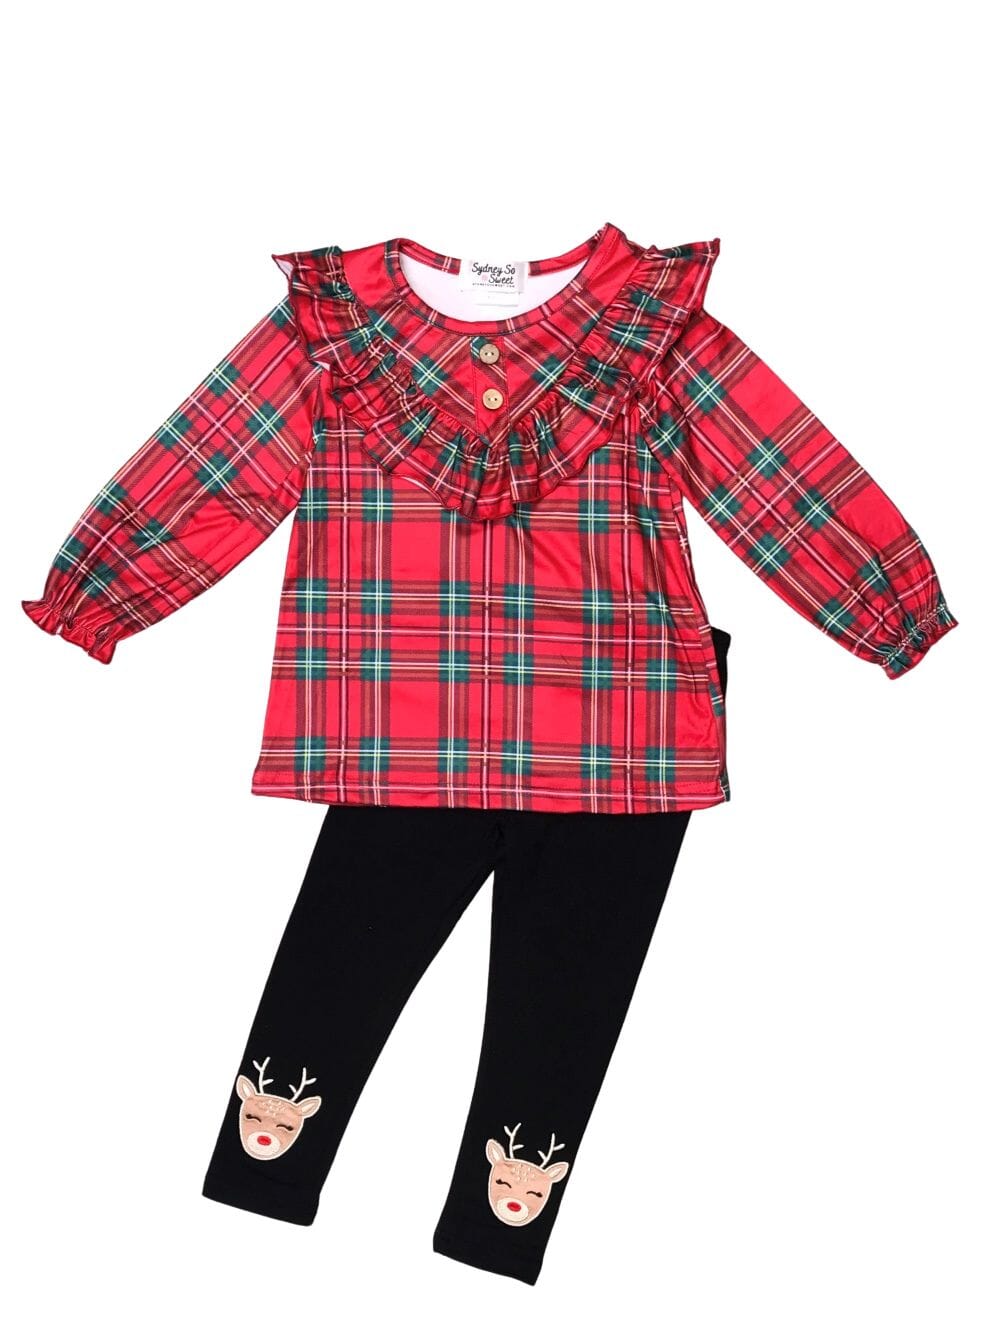 Perfectly Plaid Reindeer Christmas Leggings Outfit